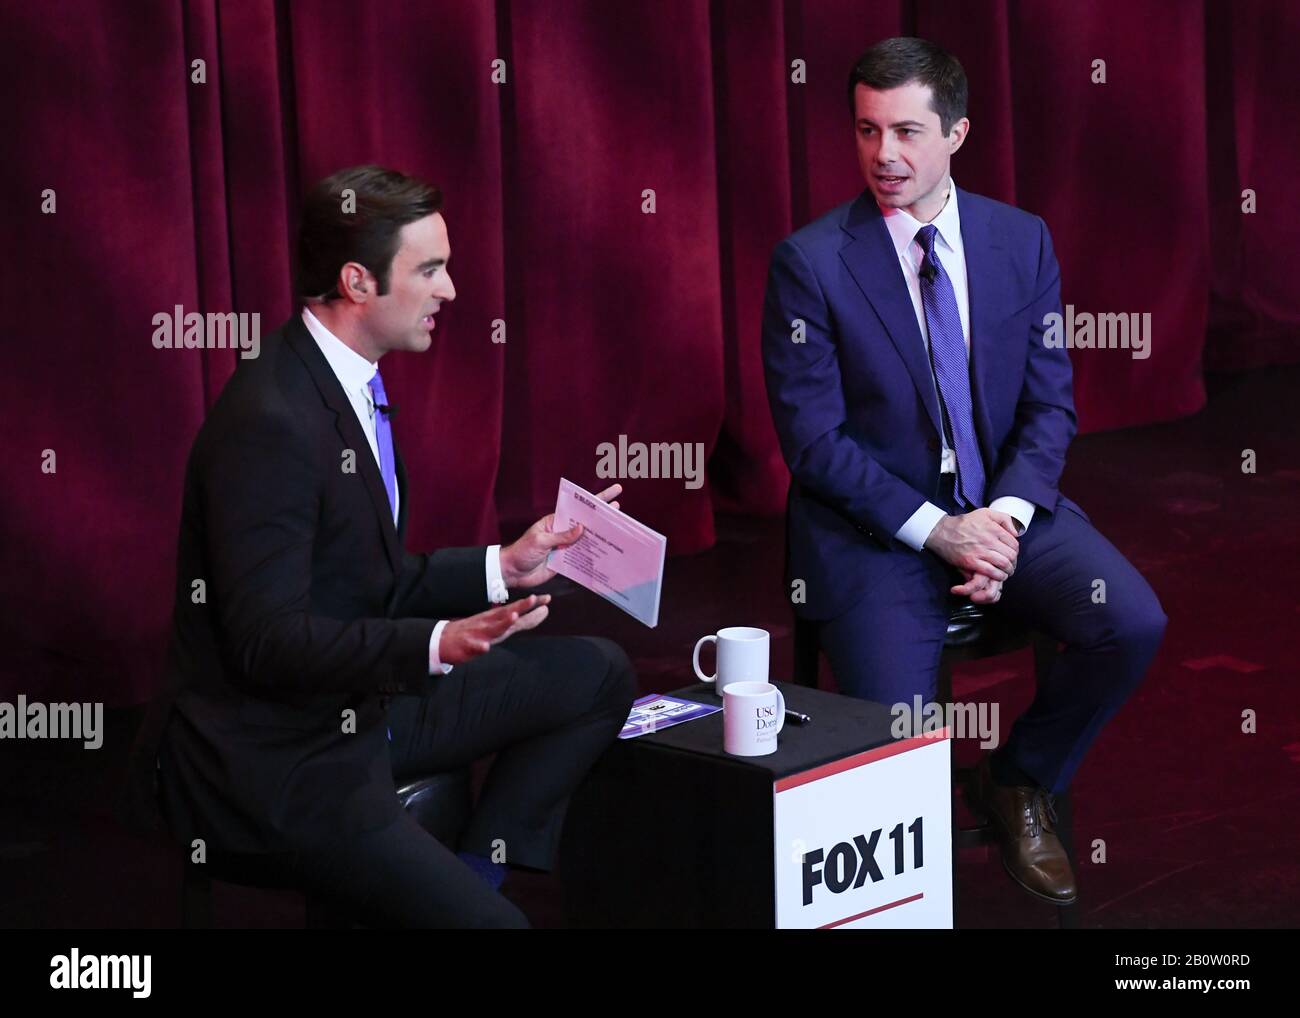 Democratic presidential candidate Pete Buttigieg (r) attends Fox11 Town Hall hosted by Elex Michaelson (l) to speak at a USC Political Assembly at Bovard Auditorium at USC on February 21, 2020 in Los Angeles, California.. Stock Photo